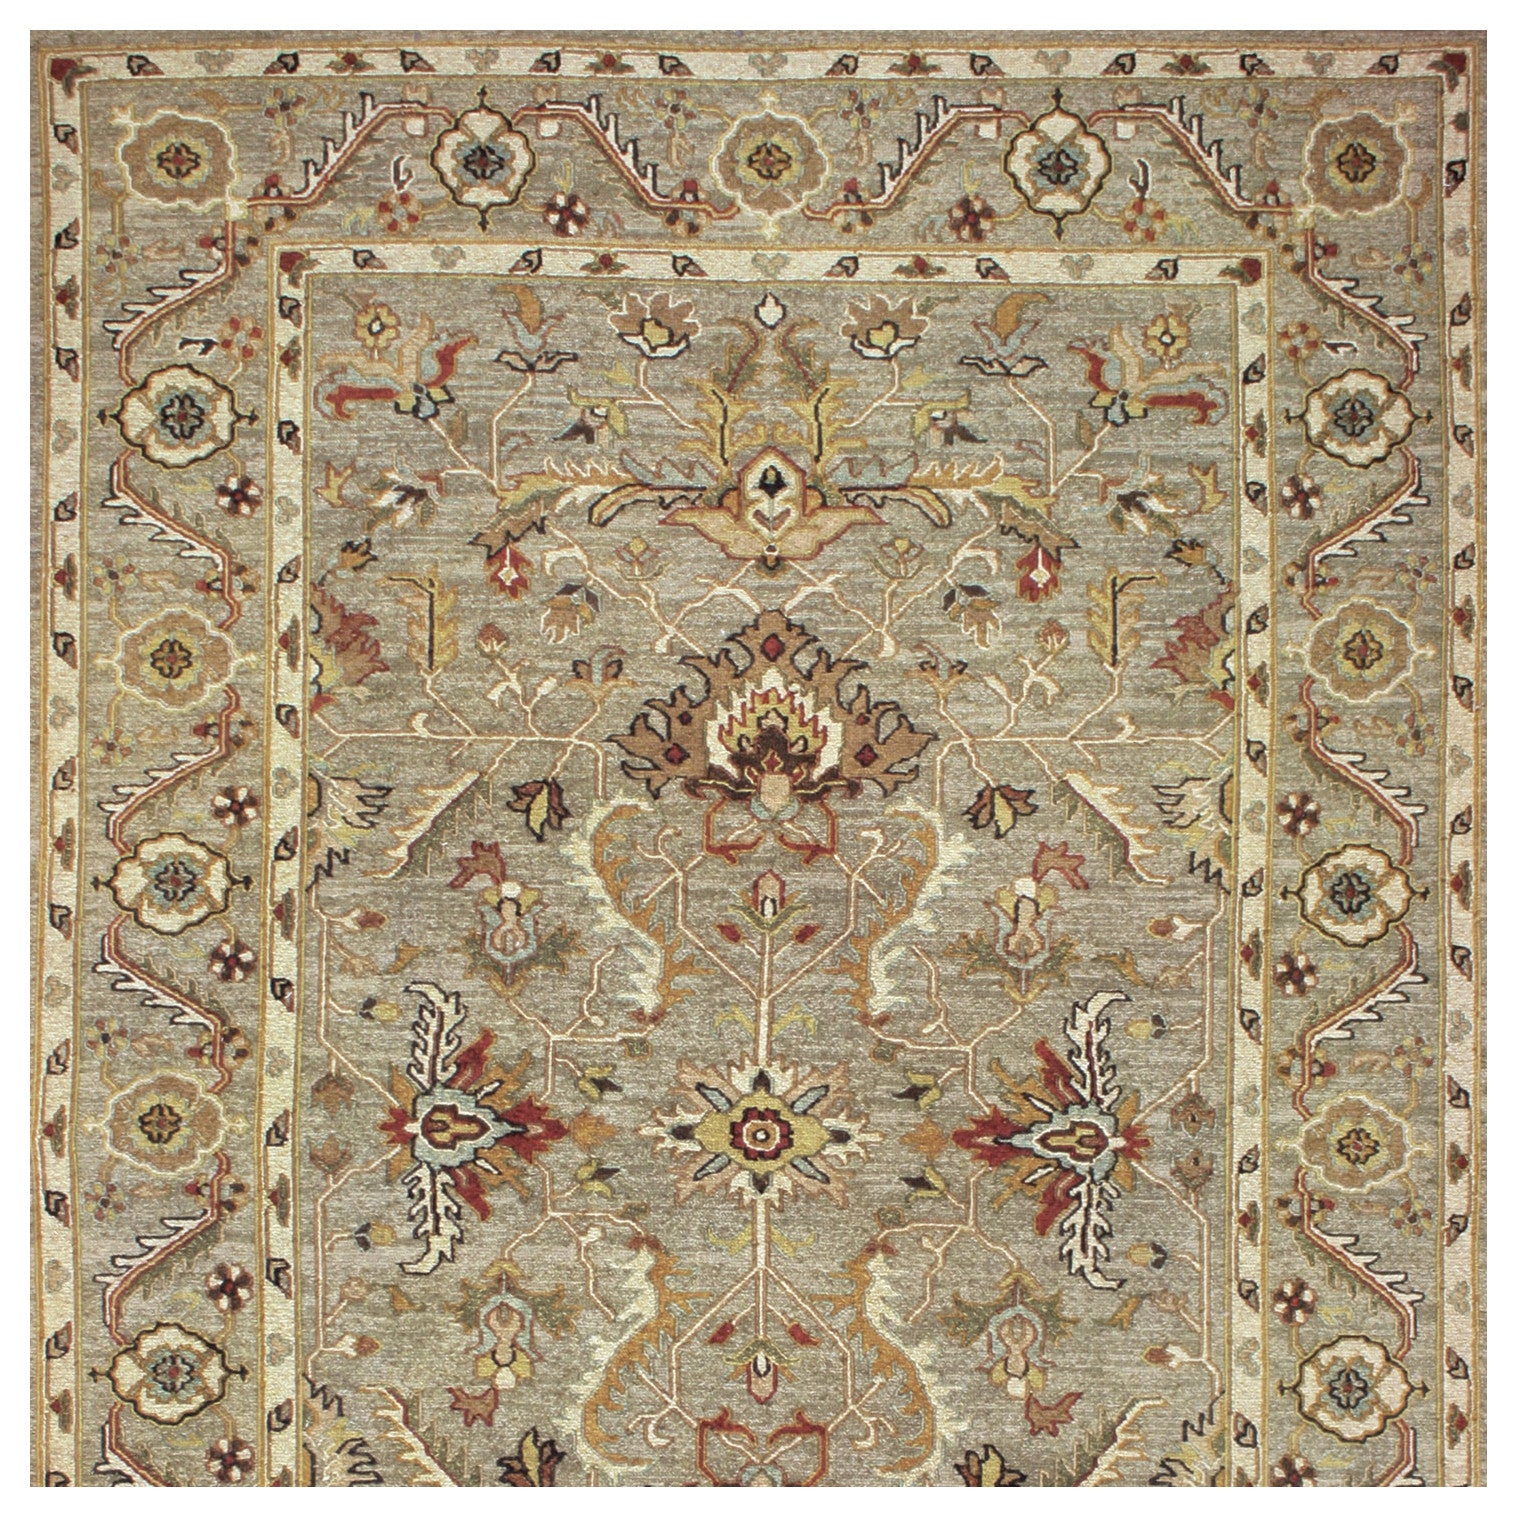 Traditions Stone 5' x 8' Rug